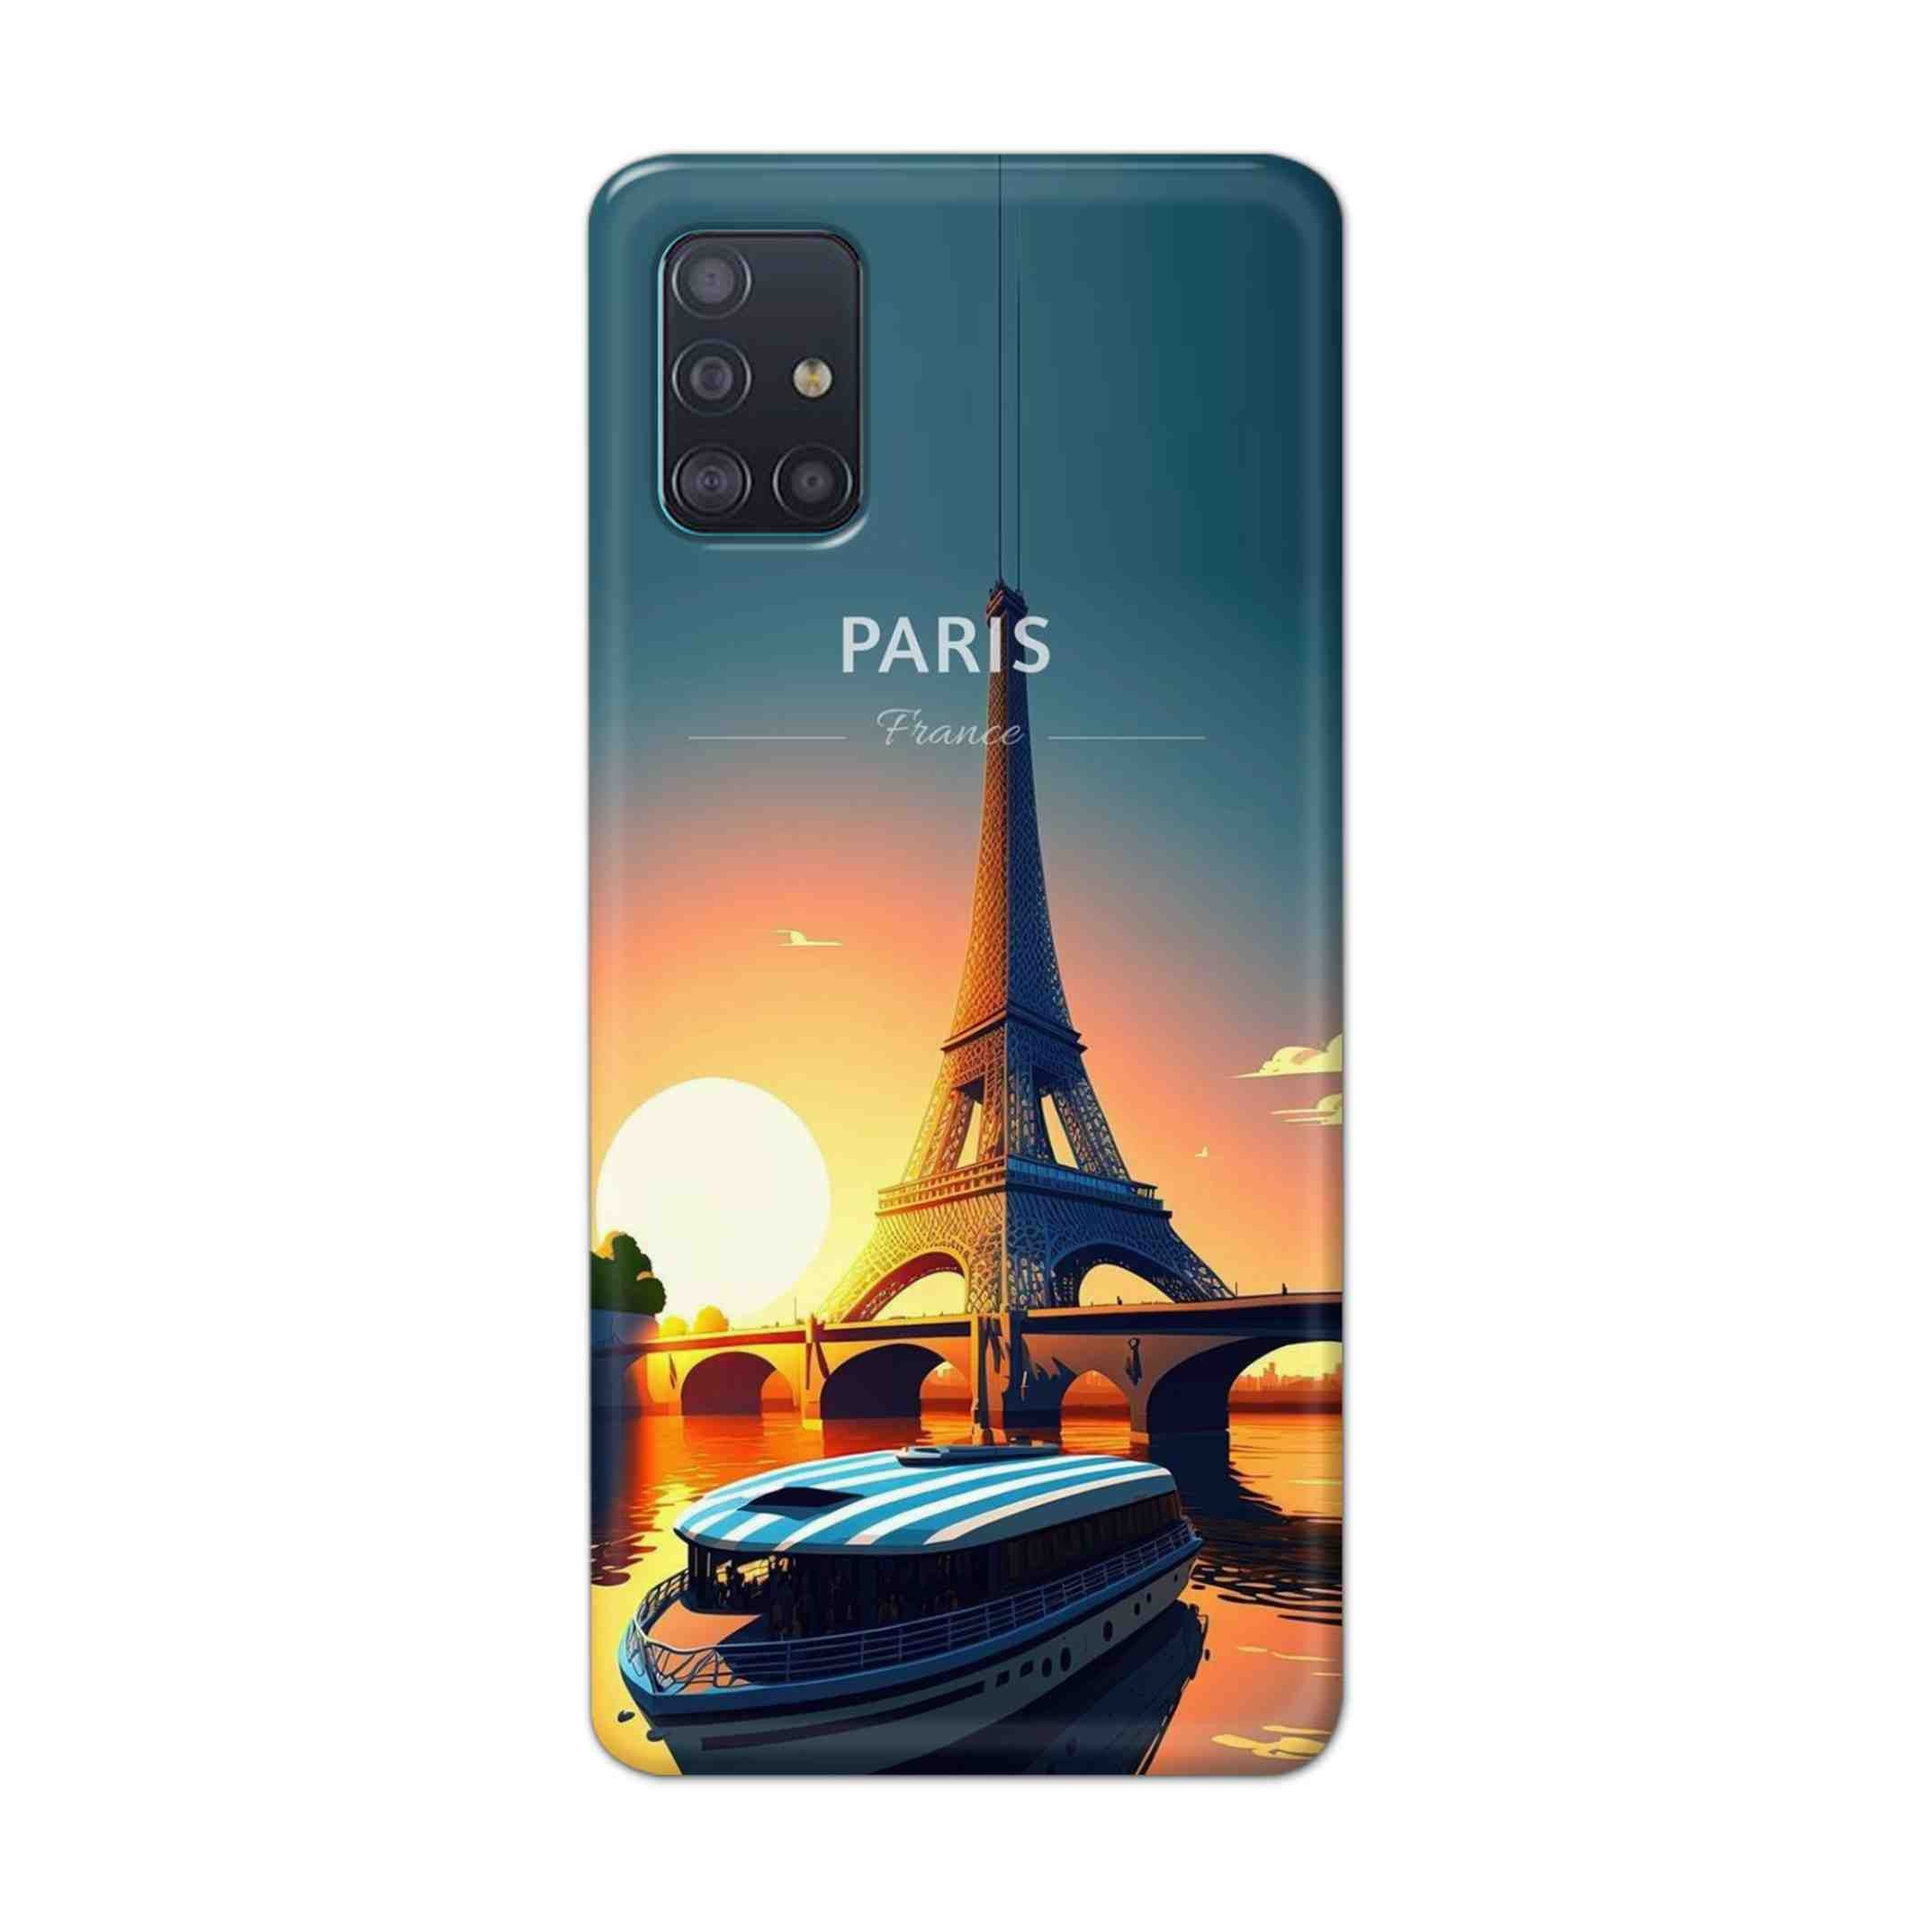 Buy France Hard Back Mobile Phone Case Cover For Samsung Galaxy A71 Online